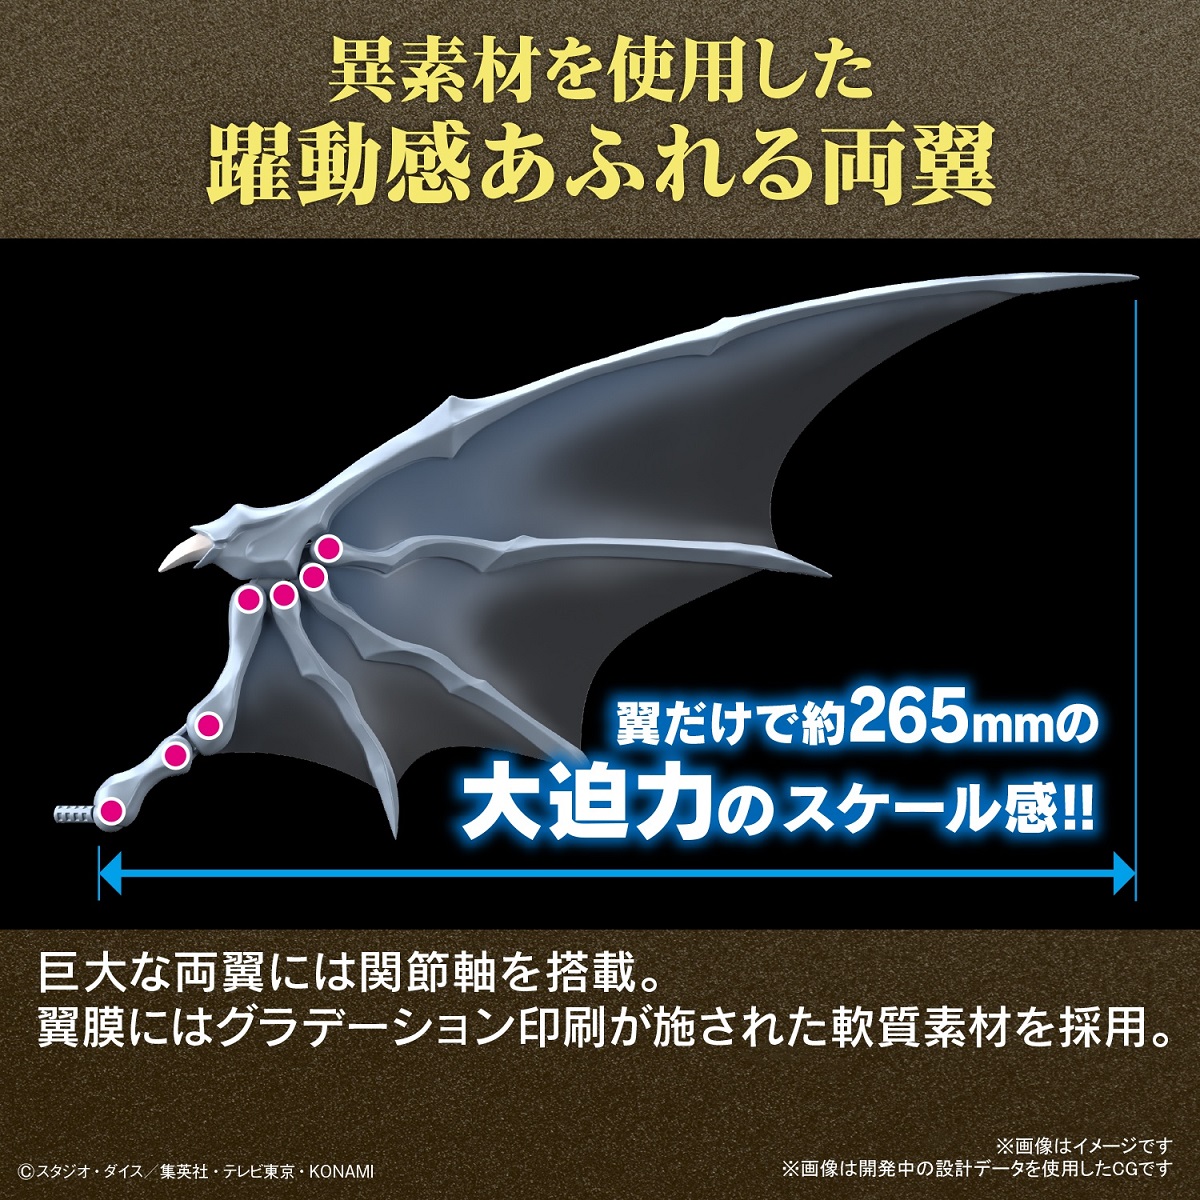 Blue-Eyes White Dragon Amplified Ver Yu-Gi-Oh! Figure-rise Standard Model Kit image count 5